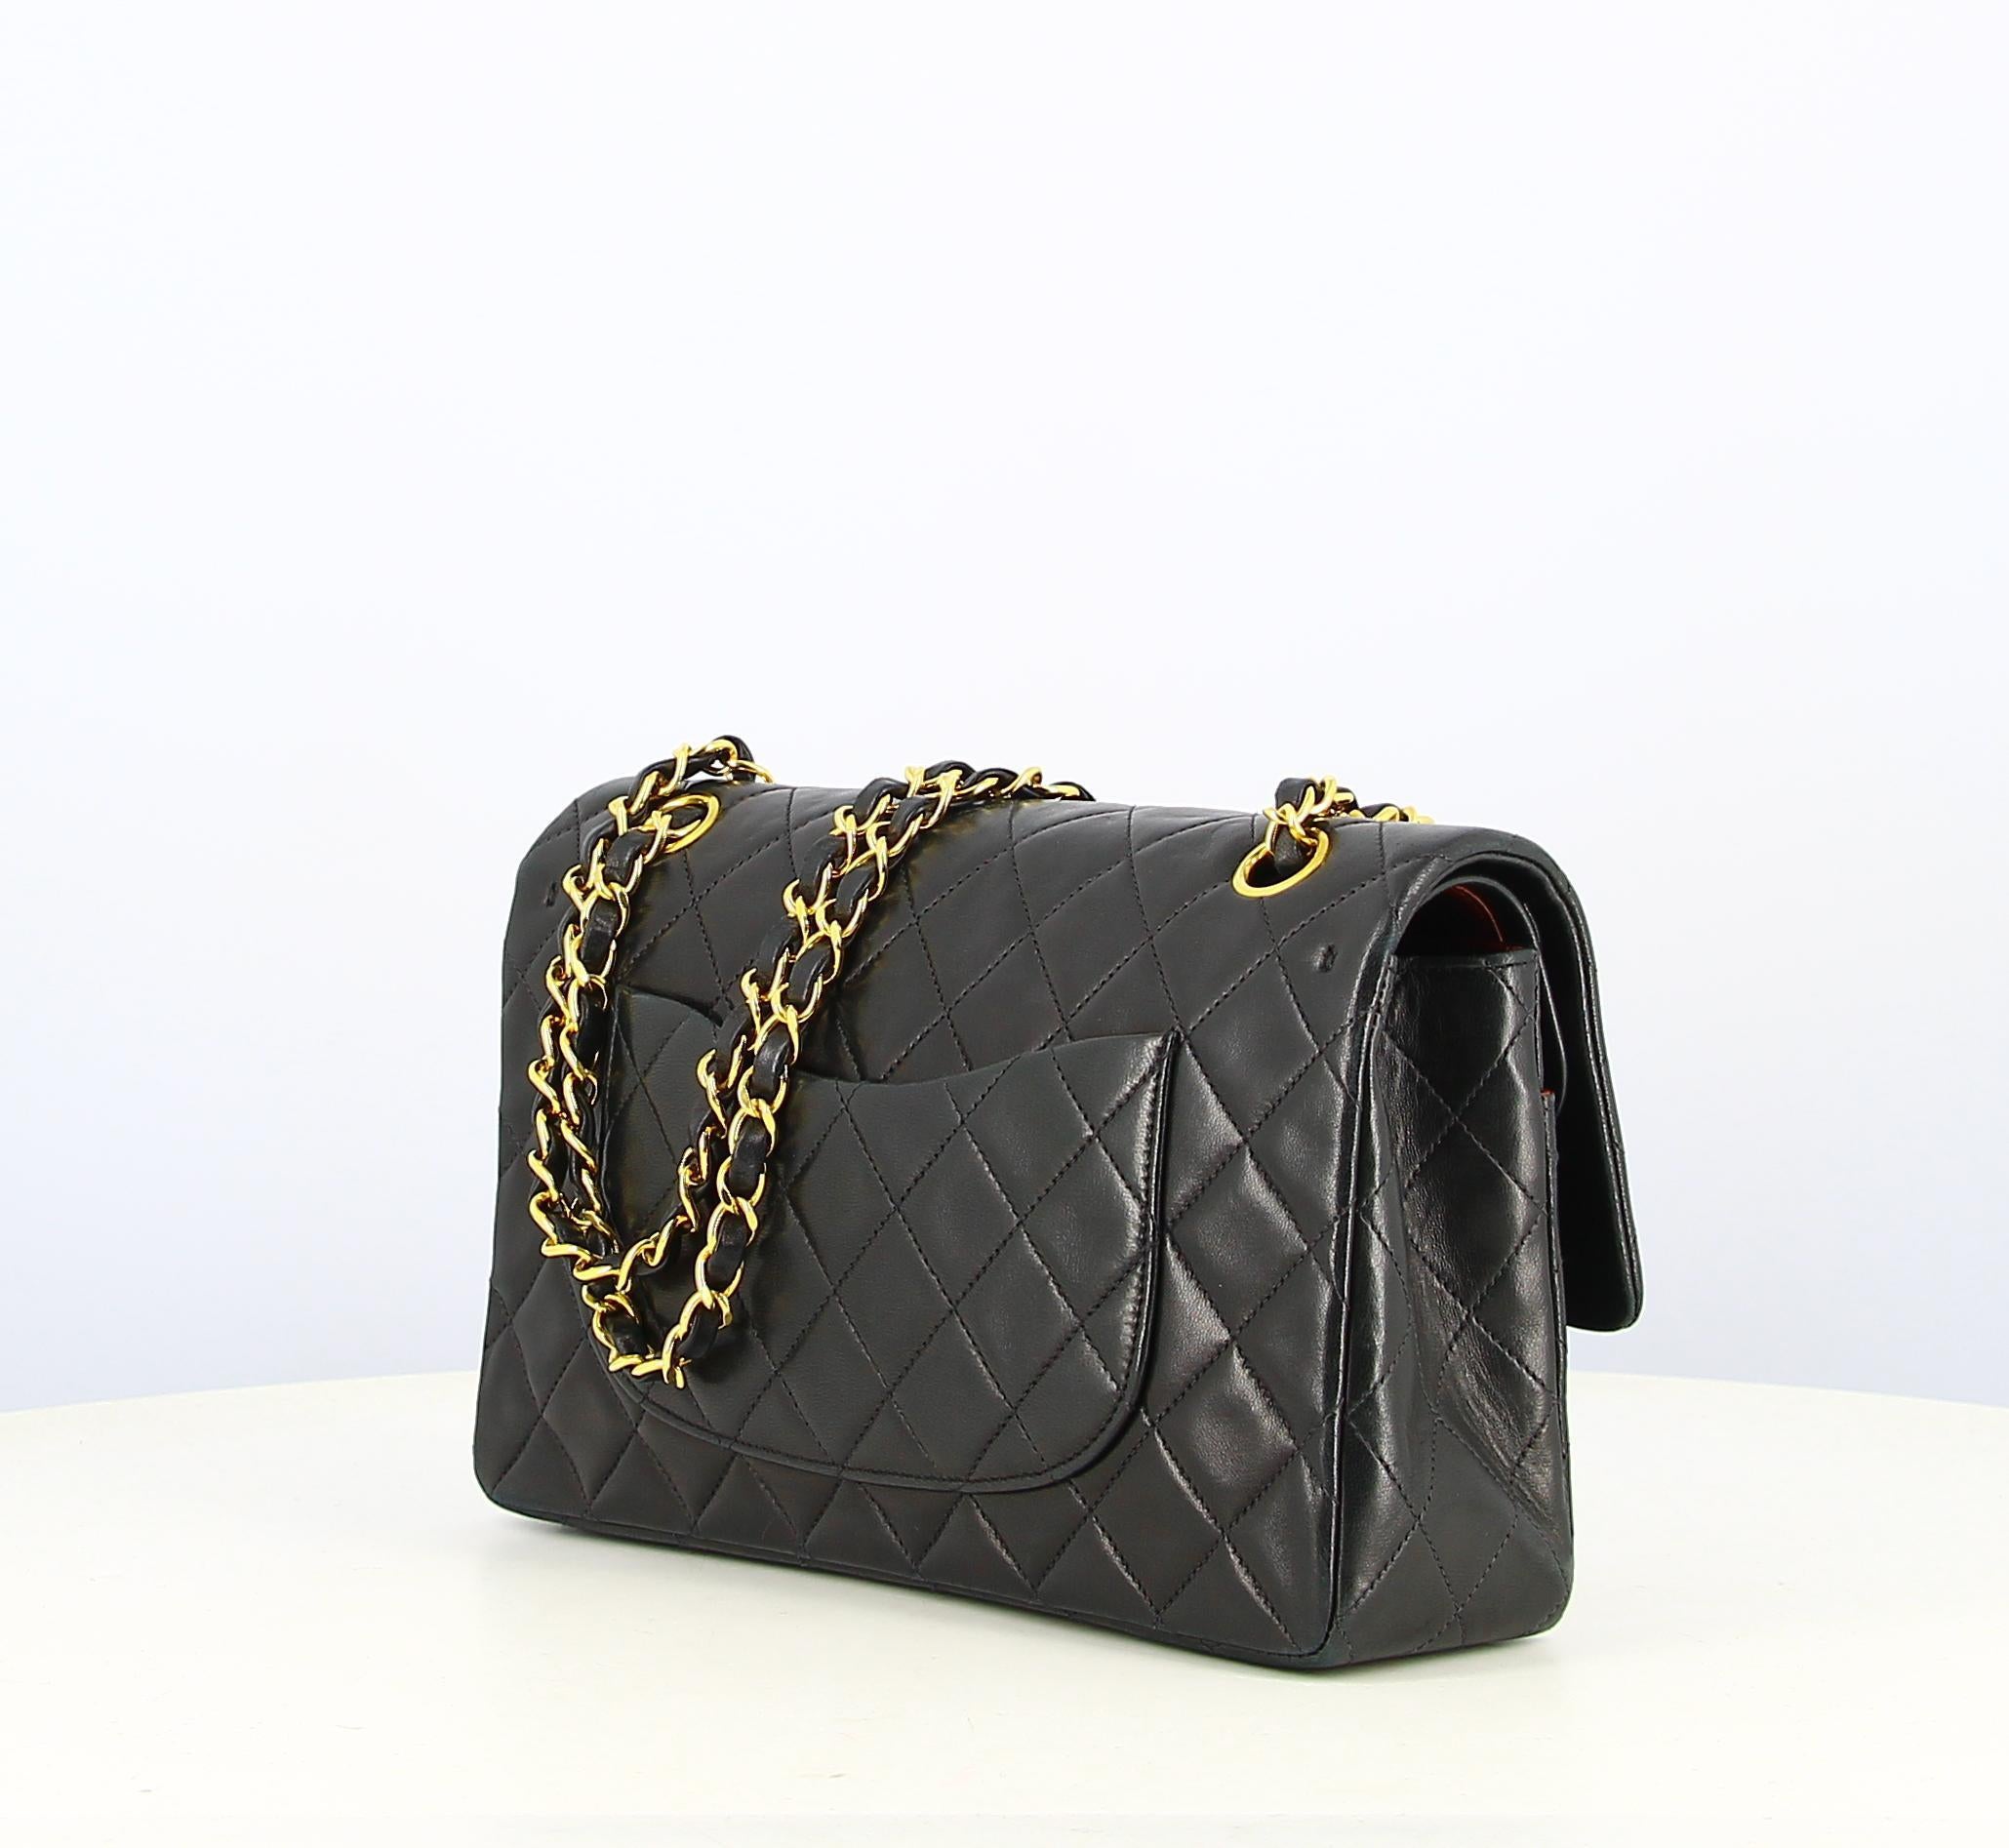 1991-1993 Chanel Timeless Black Quilted Leather Bag 1